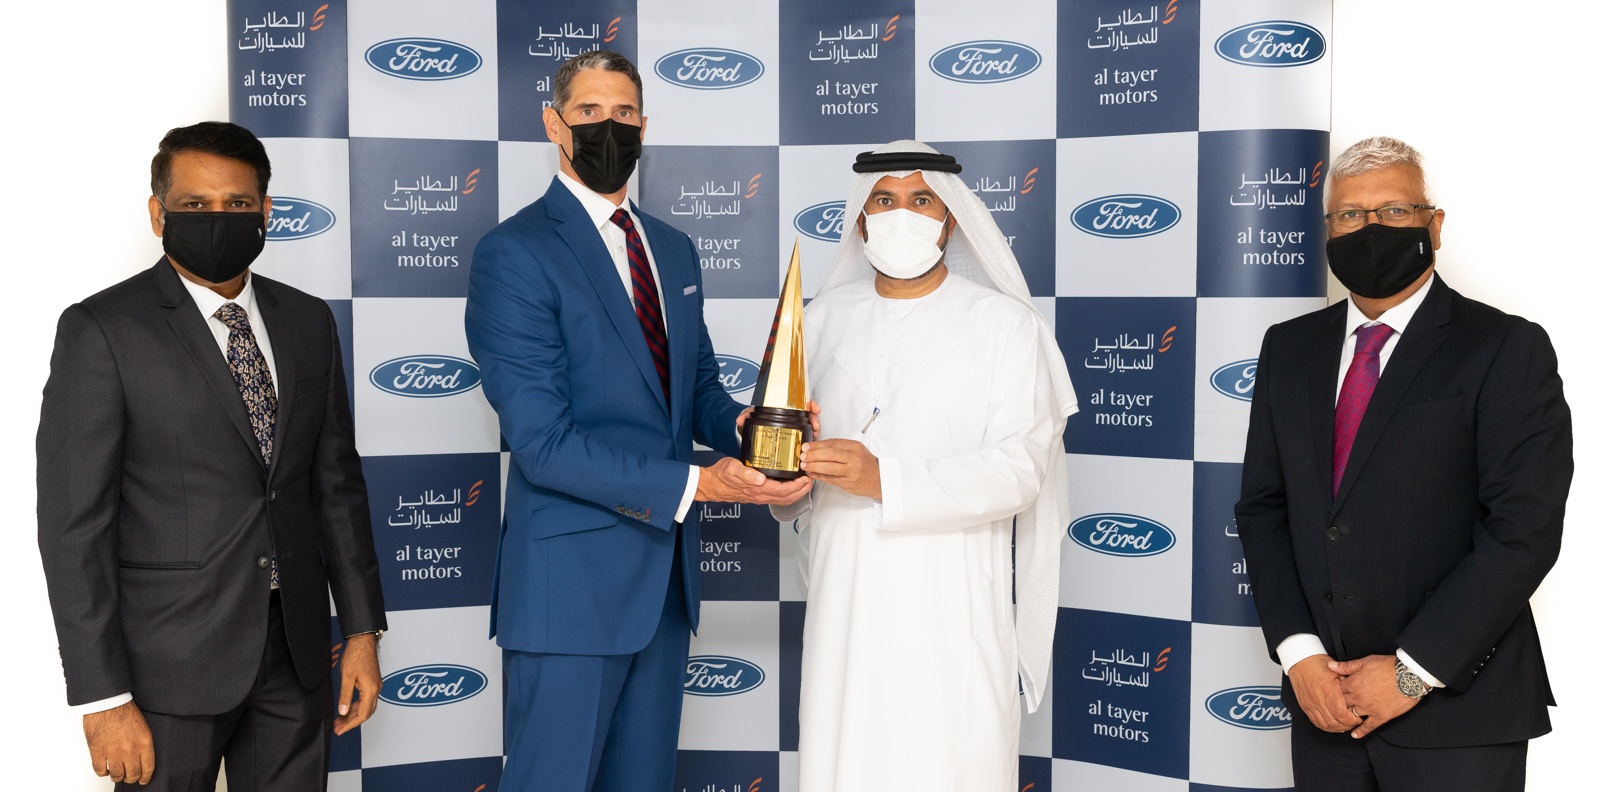 Al Tayer Motors Wins Two Prestigious Global Awards from Ford for the Second Consecutive Year